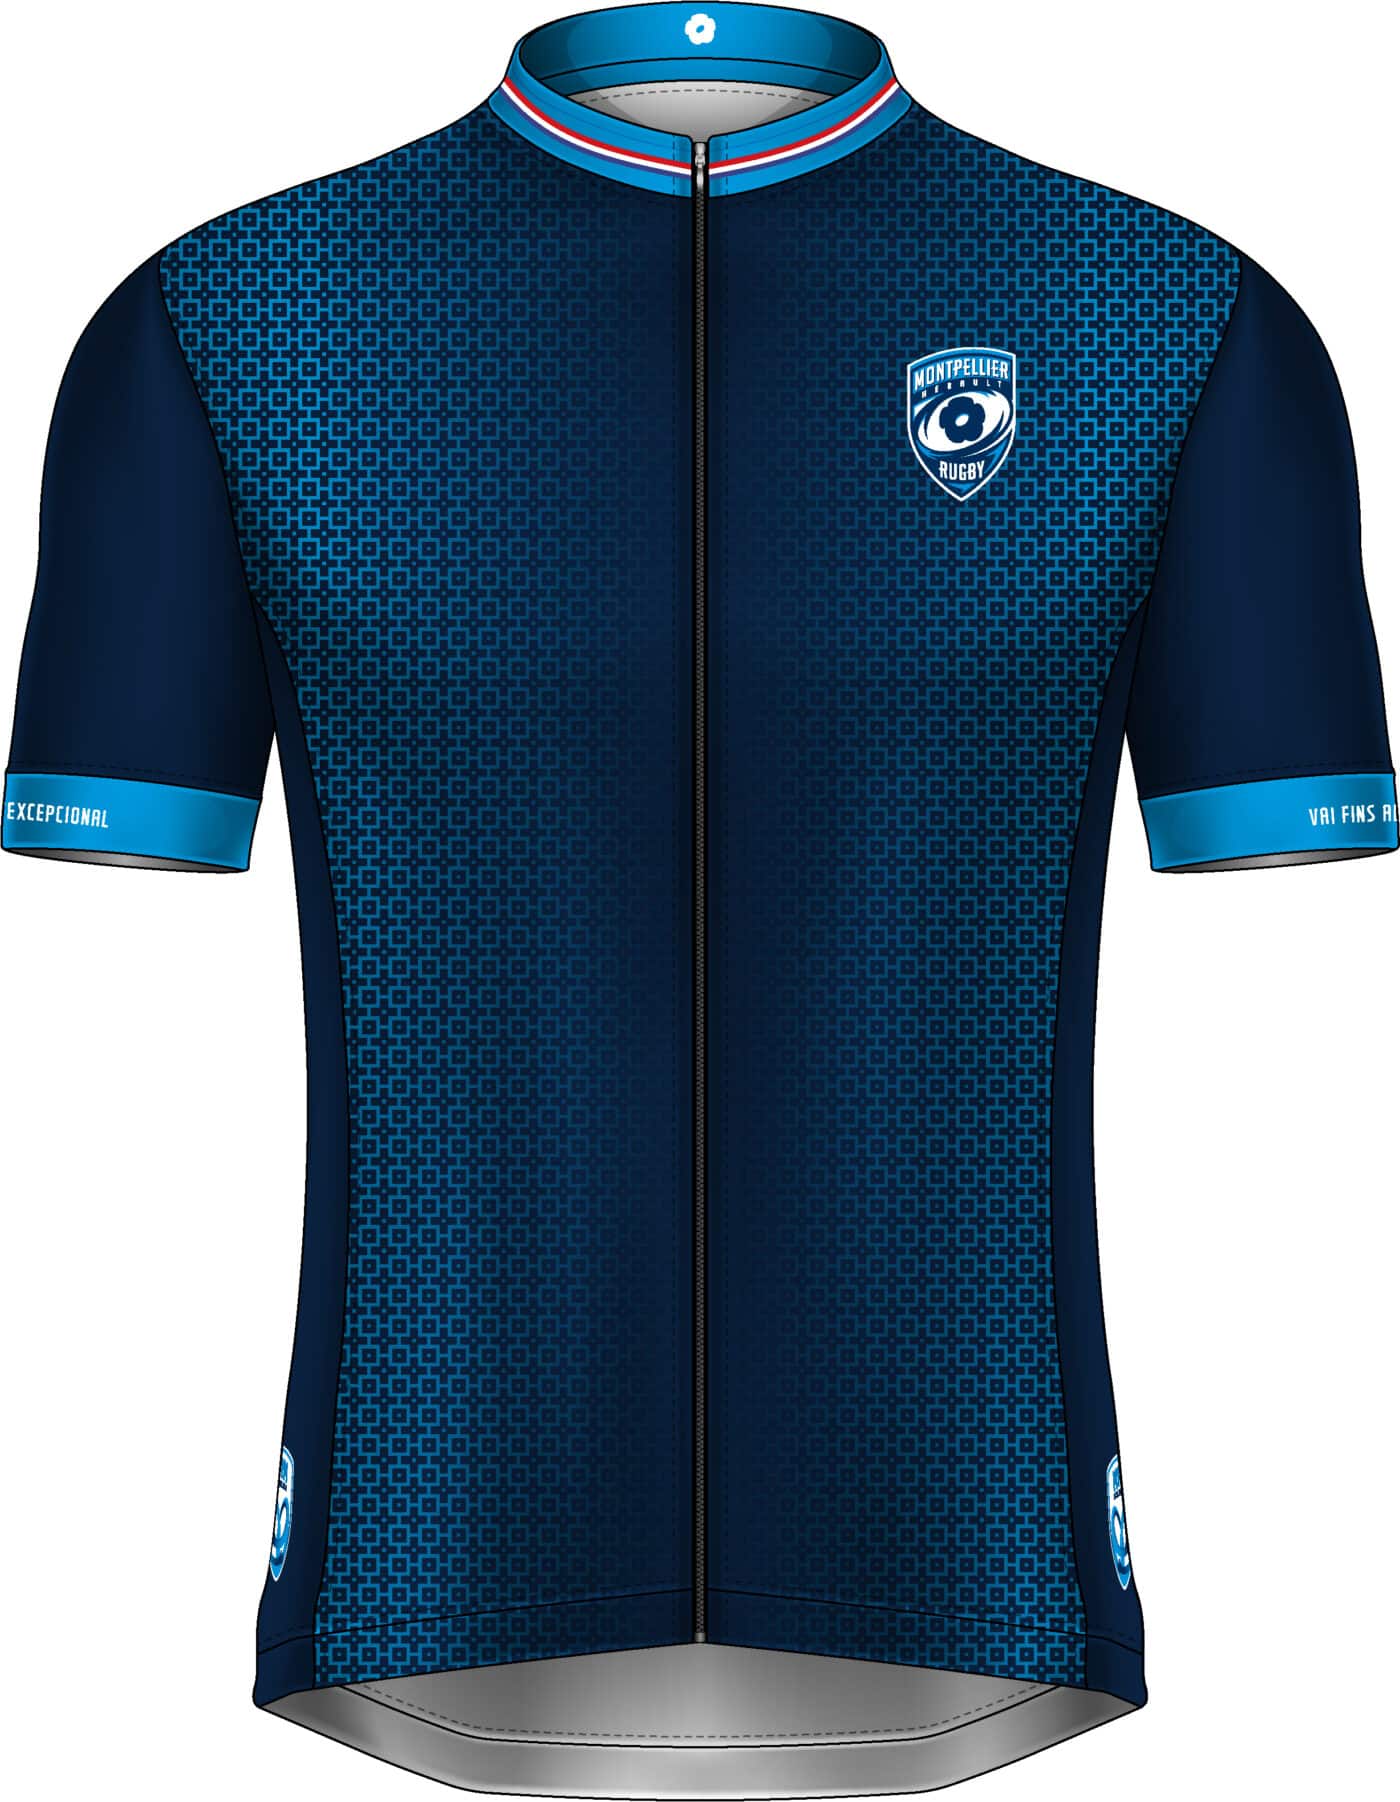 Maillot Montpellier cyclisme